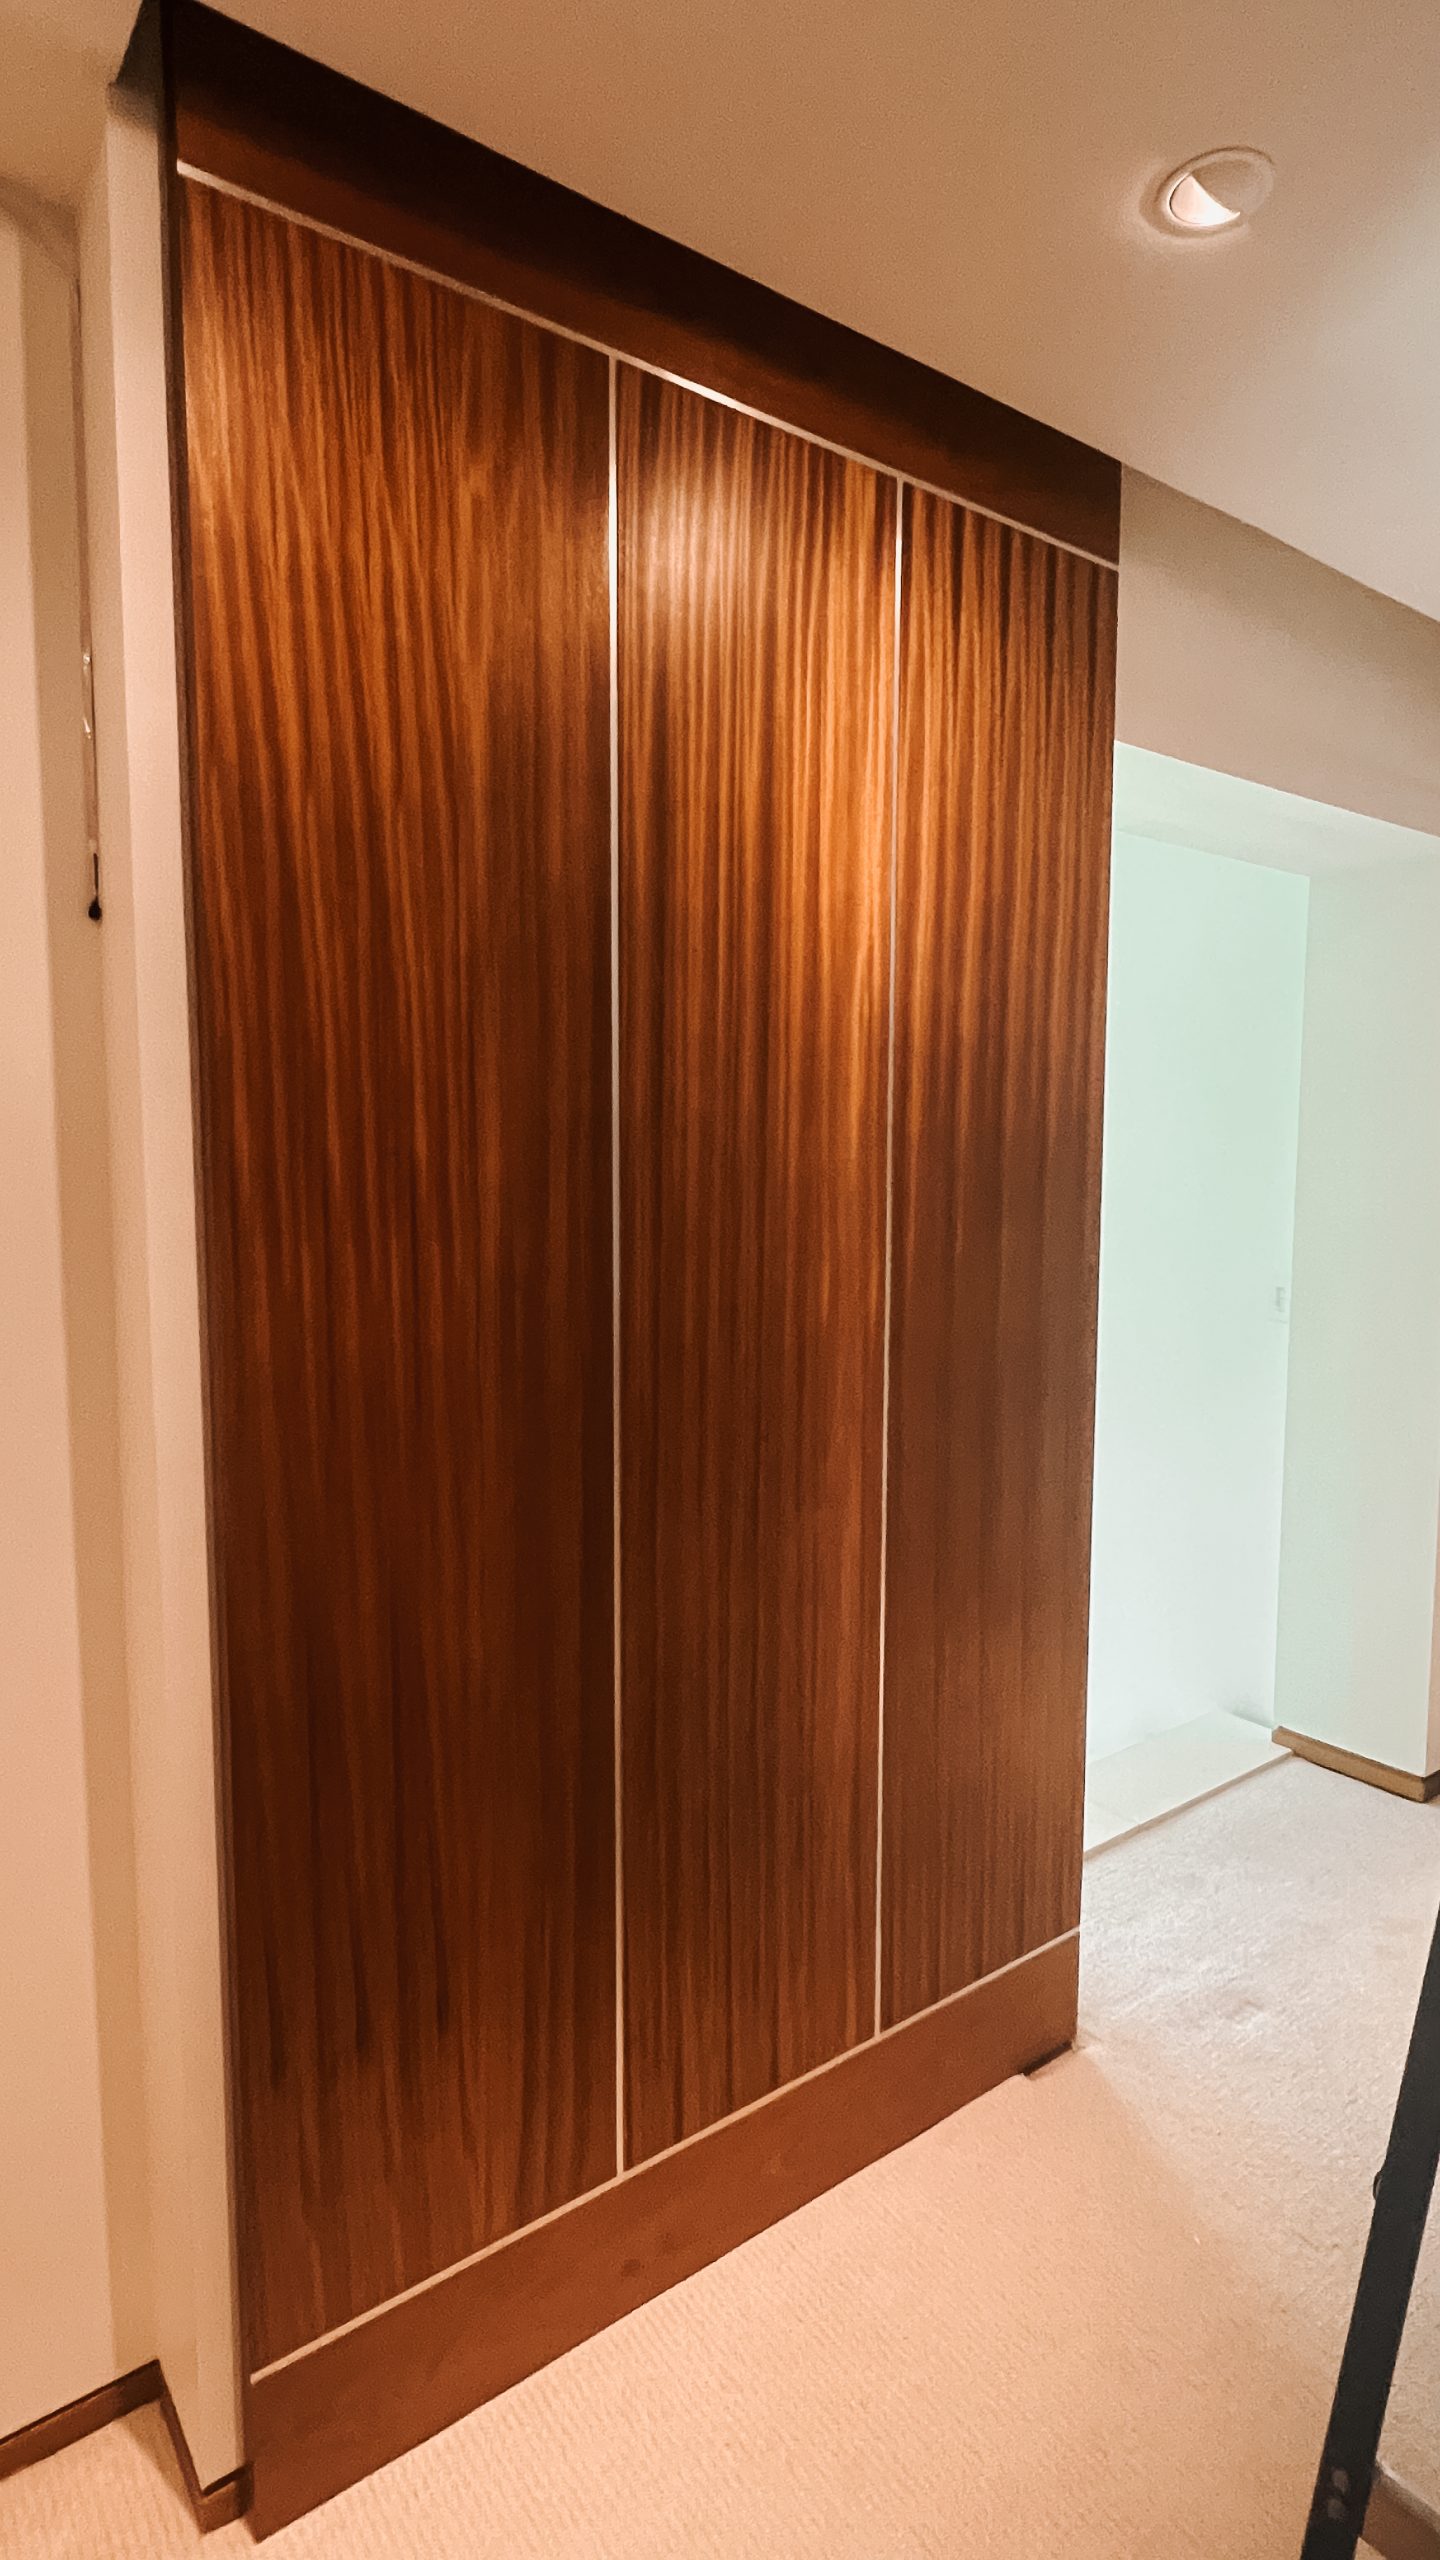 A massive ribbon striped mahogany and stainless steel sliding door